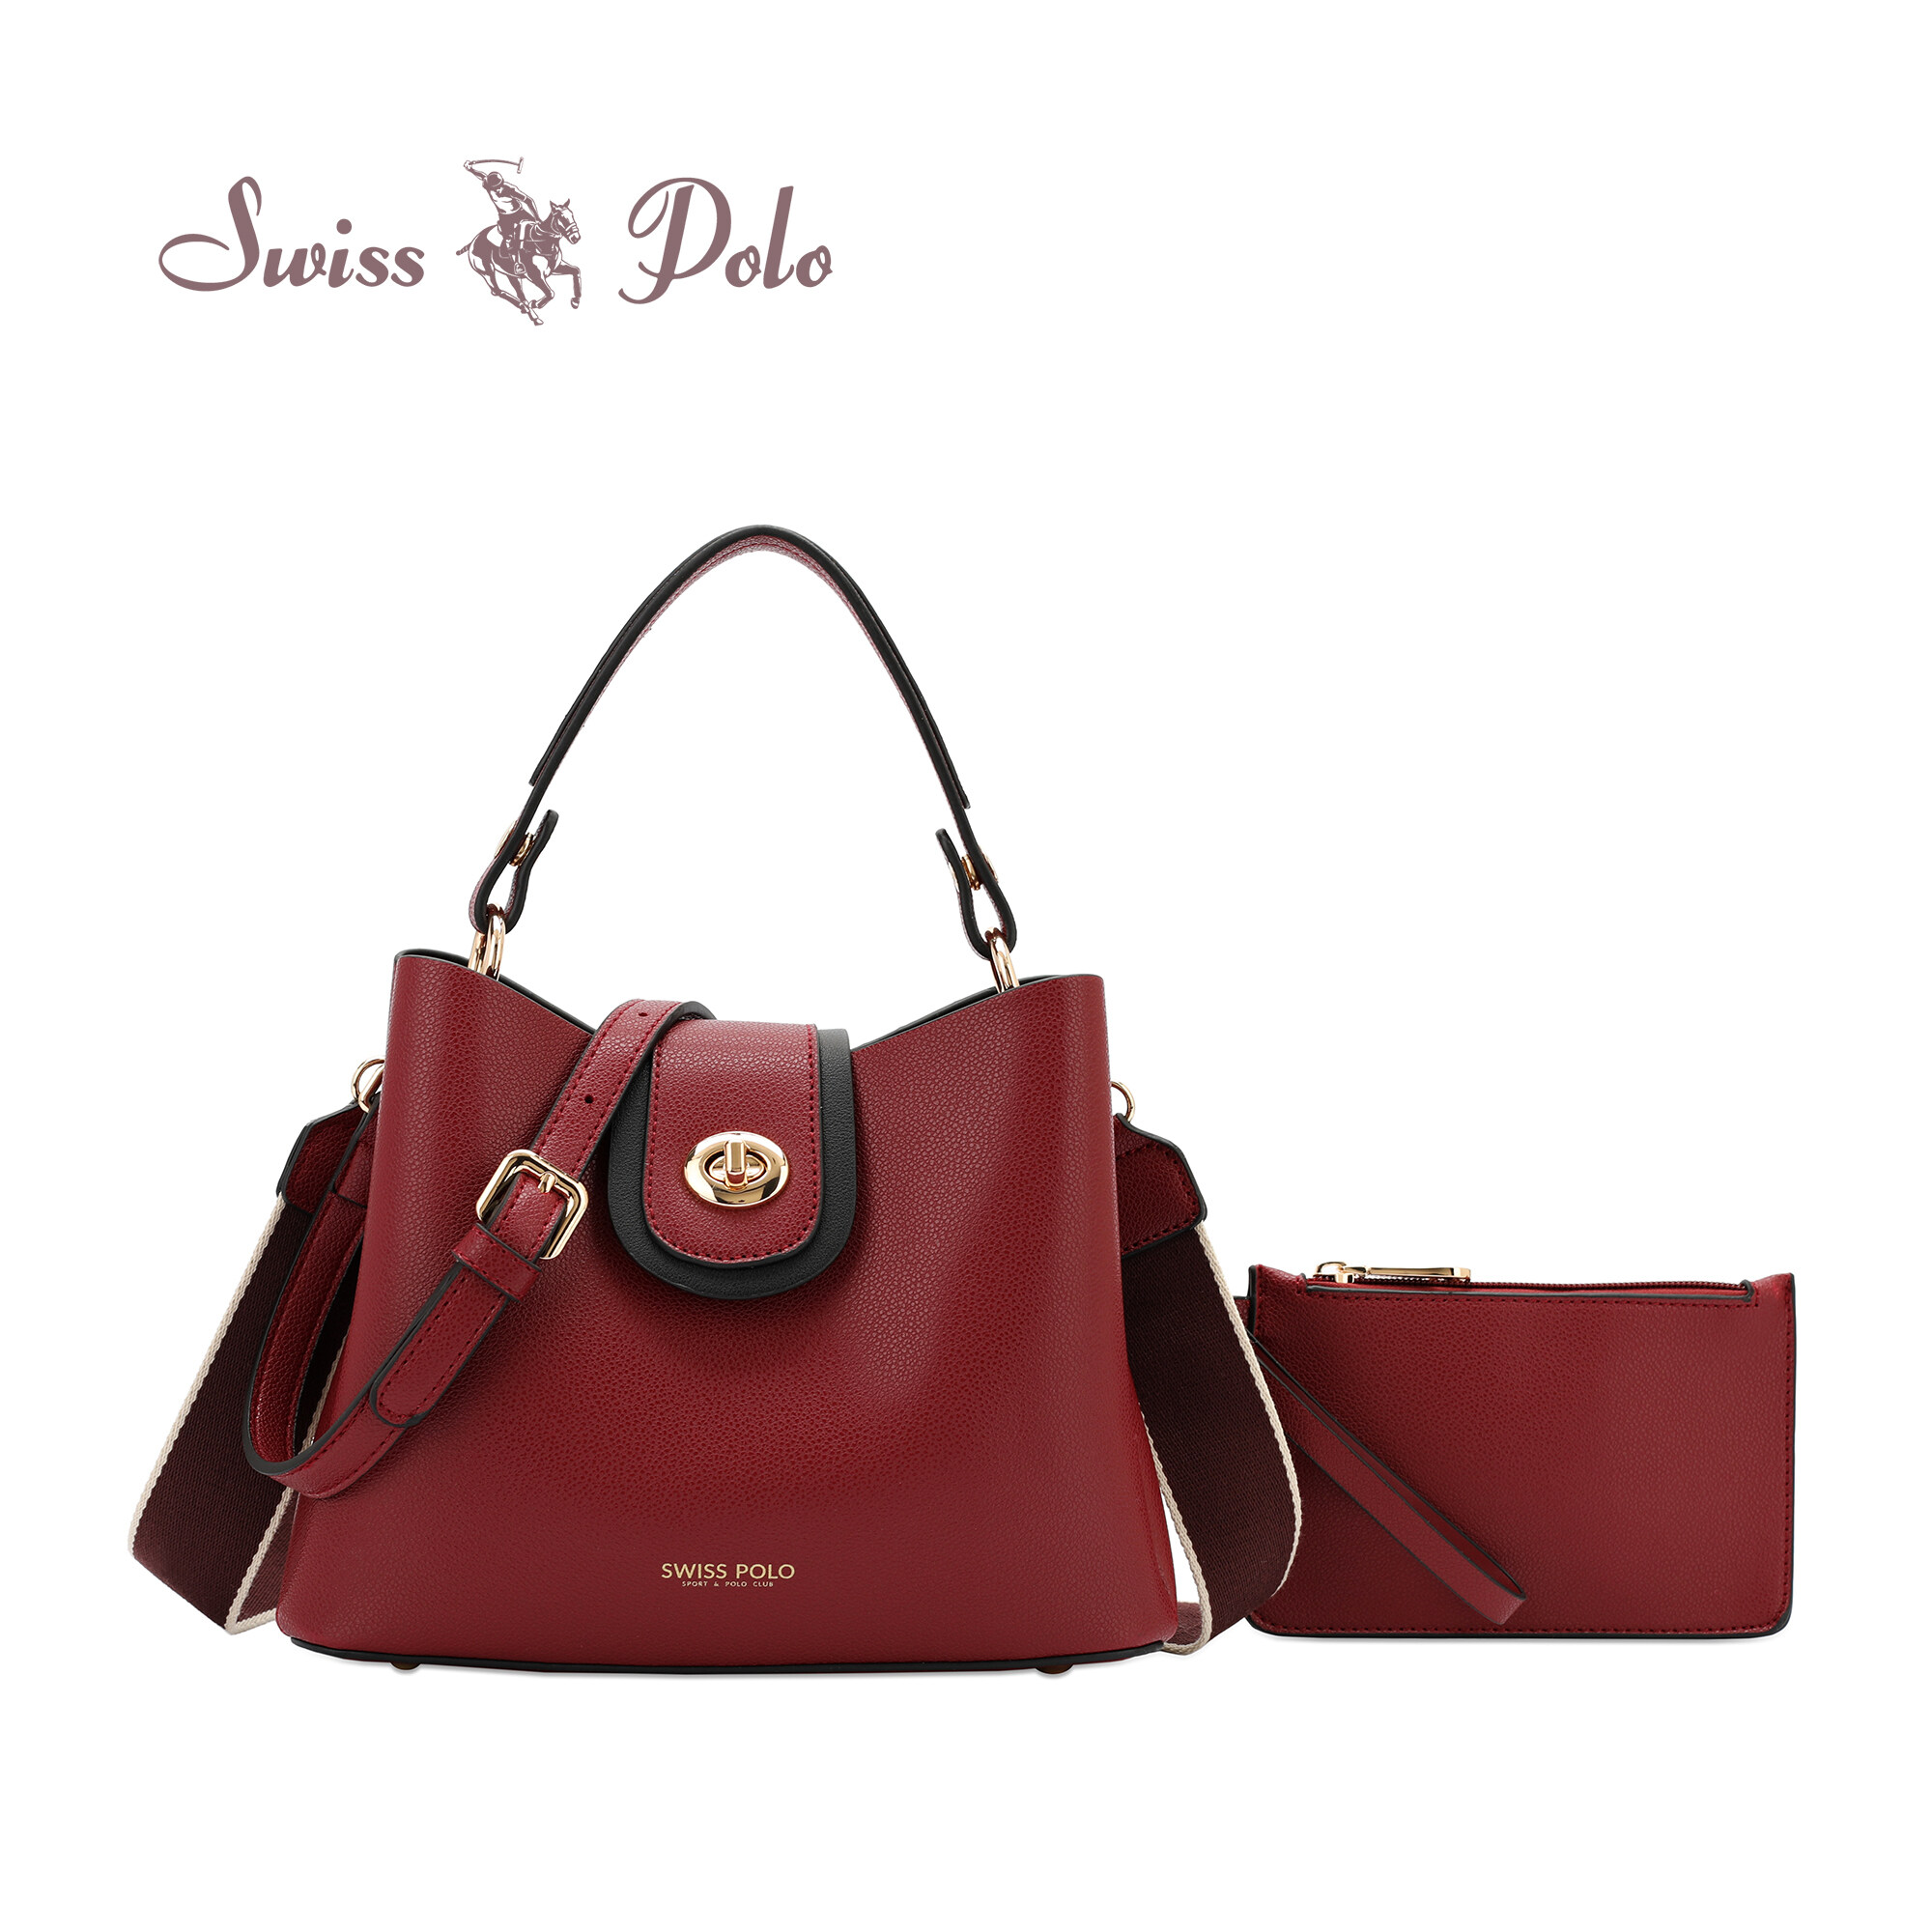 SWISS POLO 2 In 1 Ladies Top Handle Sling Bag With Pouch HEA 98973-6 MAROON